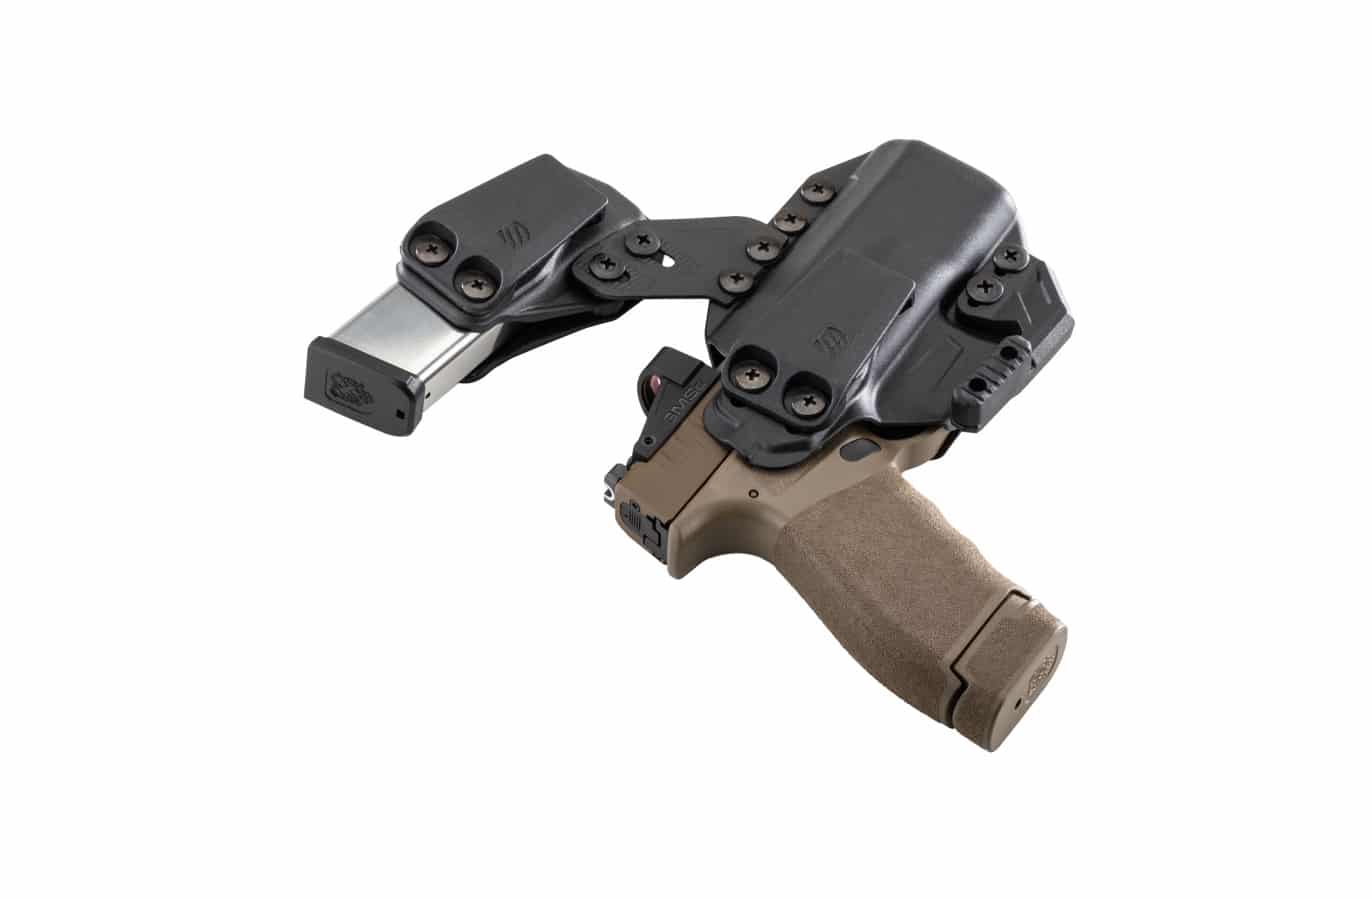 In this digital image, we see a Blackhawk Stache holster with magazine pouch. A Springfield 9mm handgun and spare magazine are in the holster.